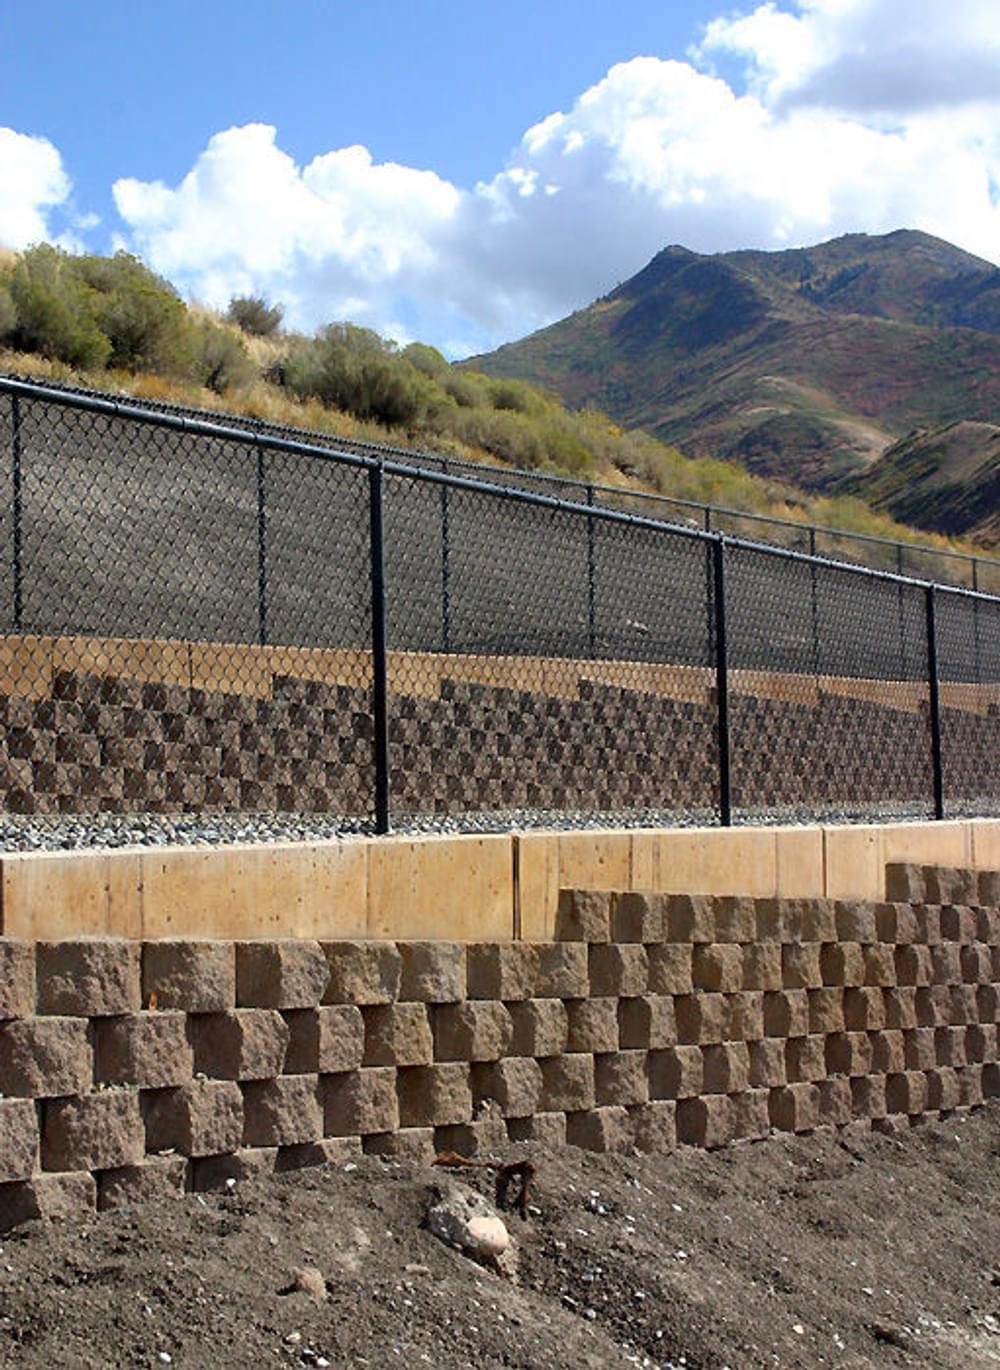 3000 feet of retaining walls were constructed as part of the Parley's Crossing Trail project at I-215, Salt Lake City, Utah